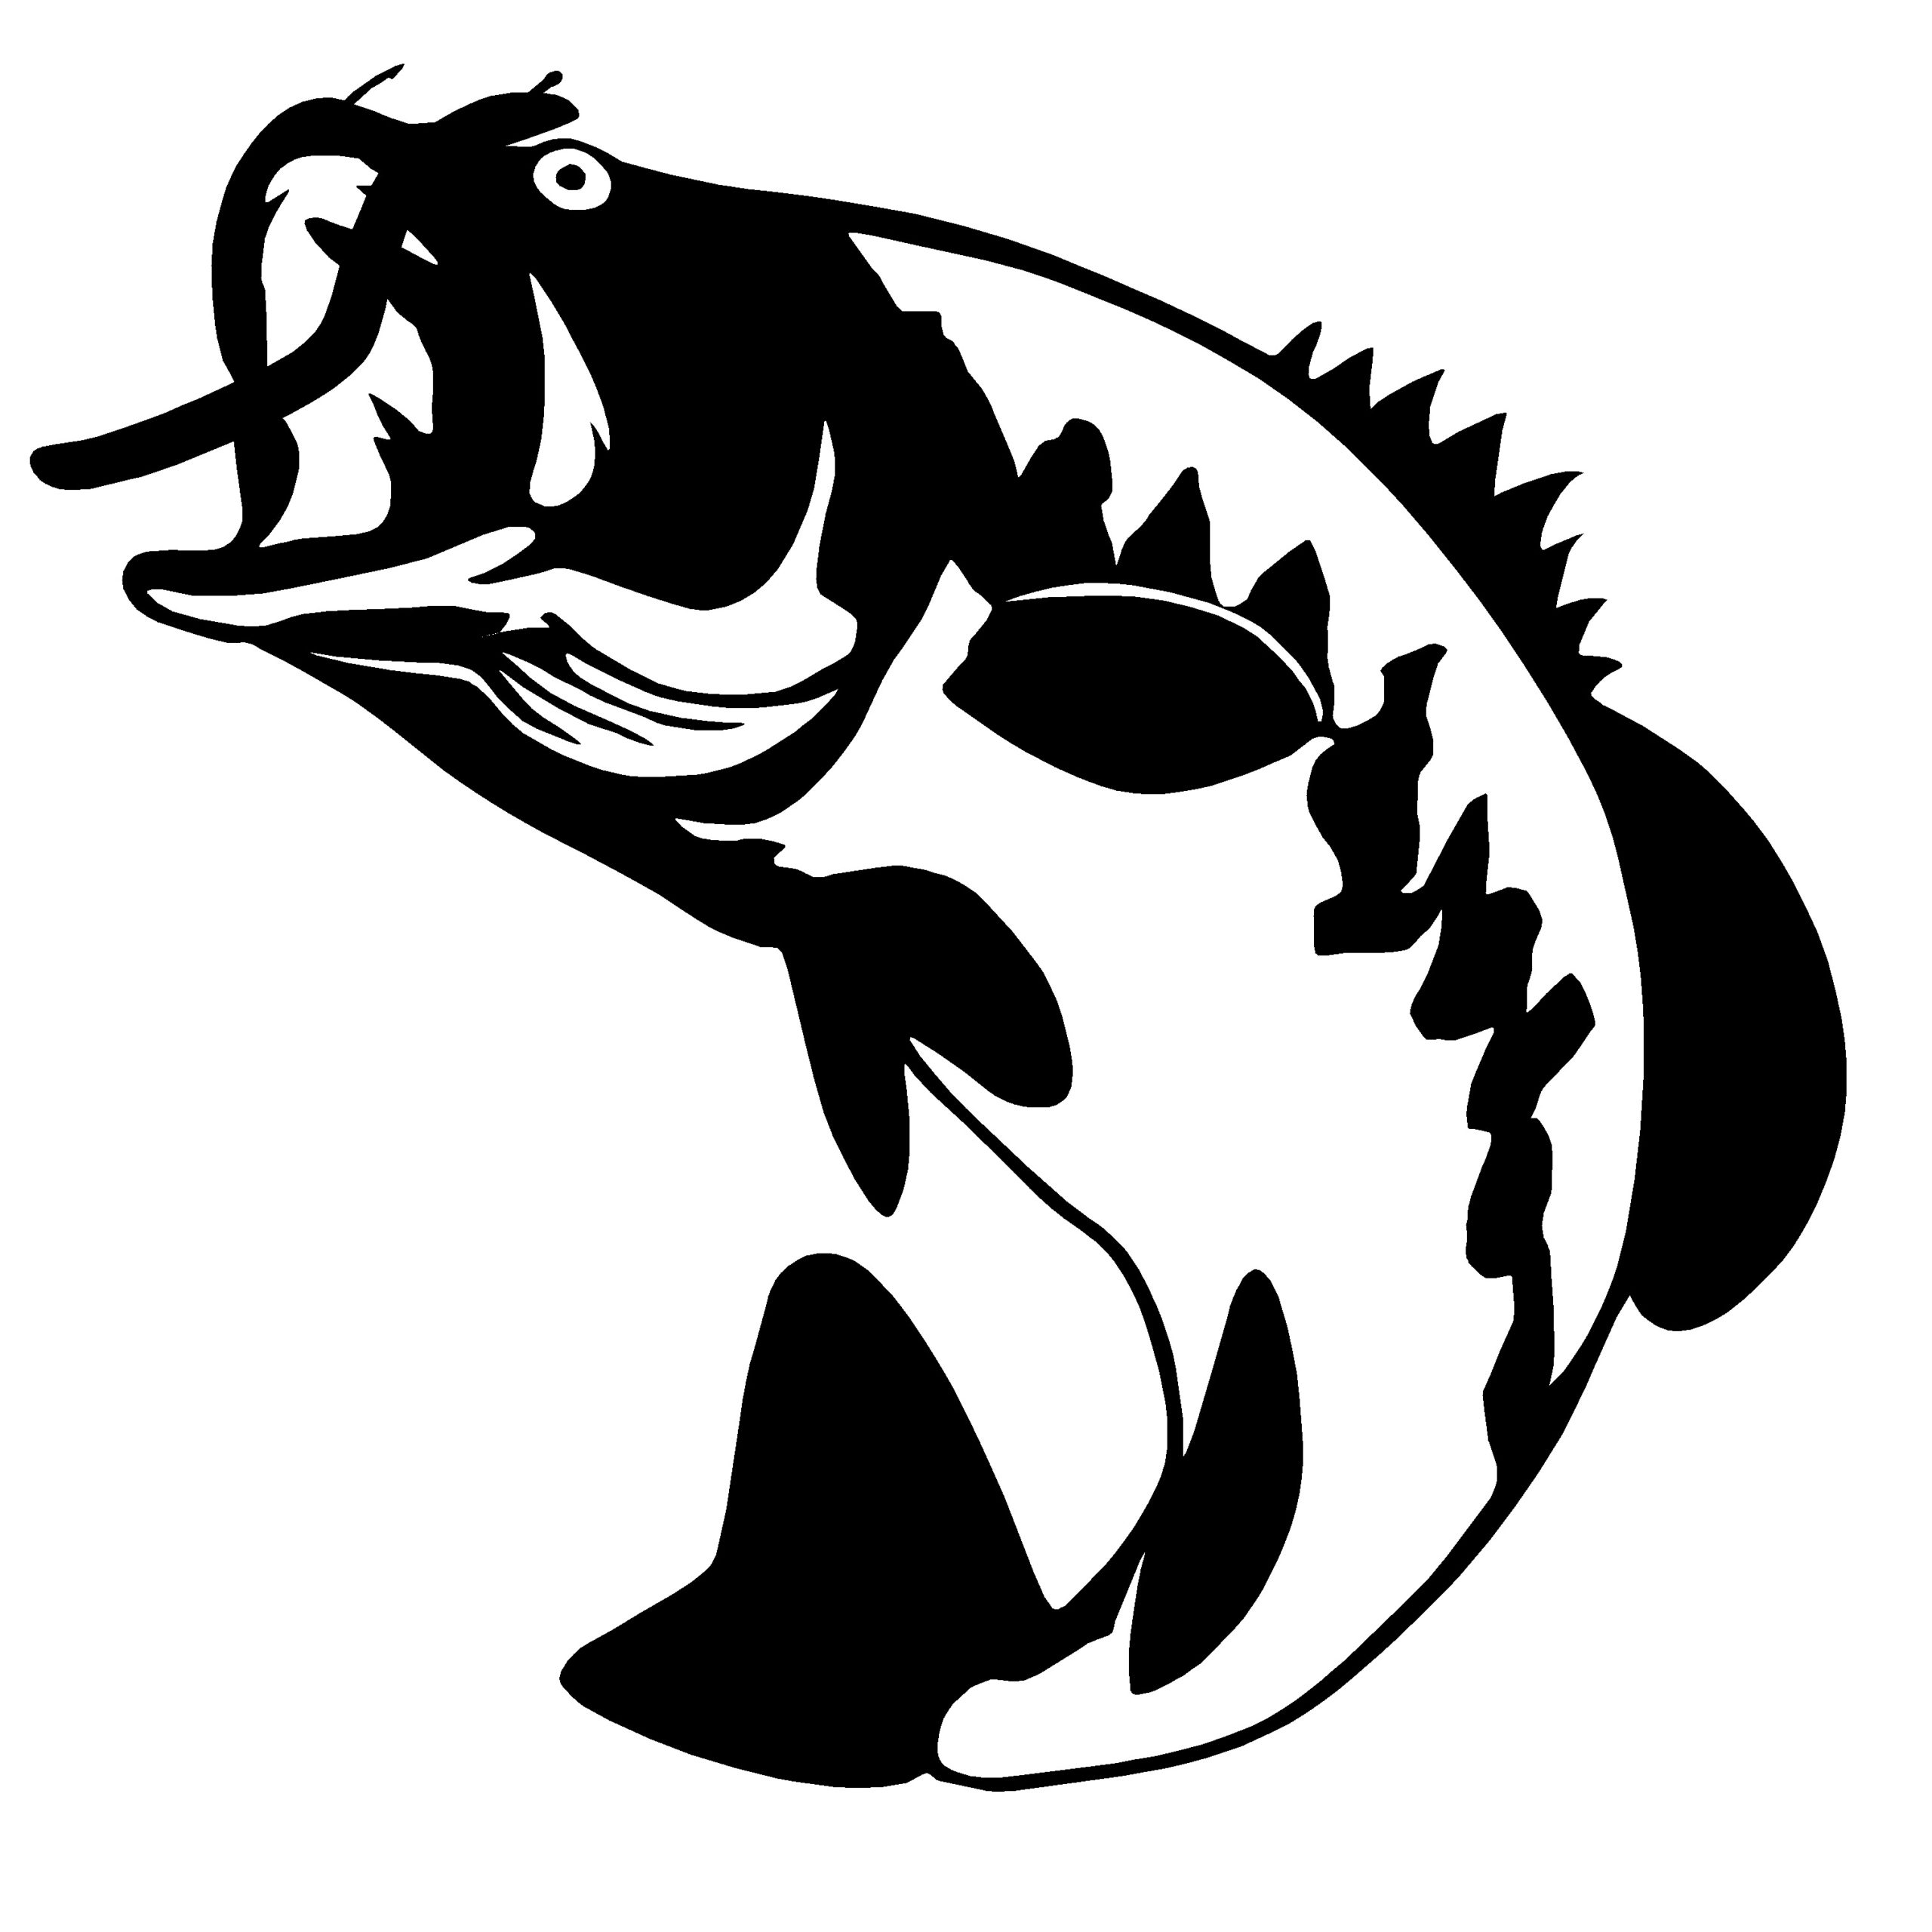 Outdoor Fishing Stickers, Fish Decals, Bass Decal